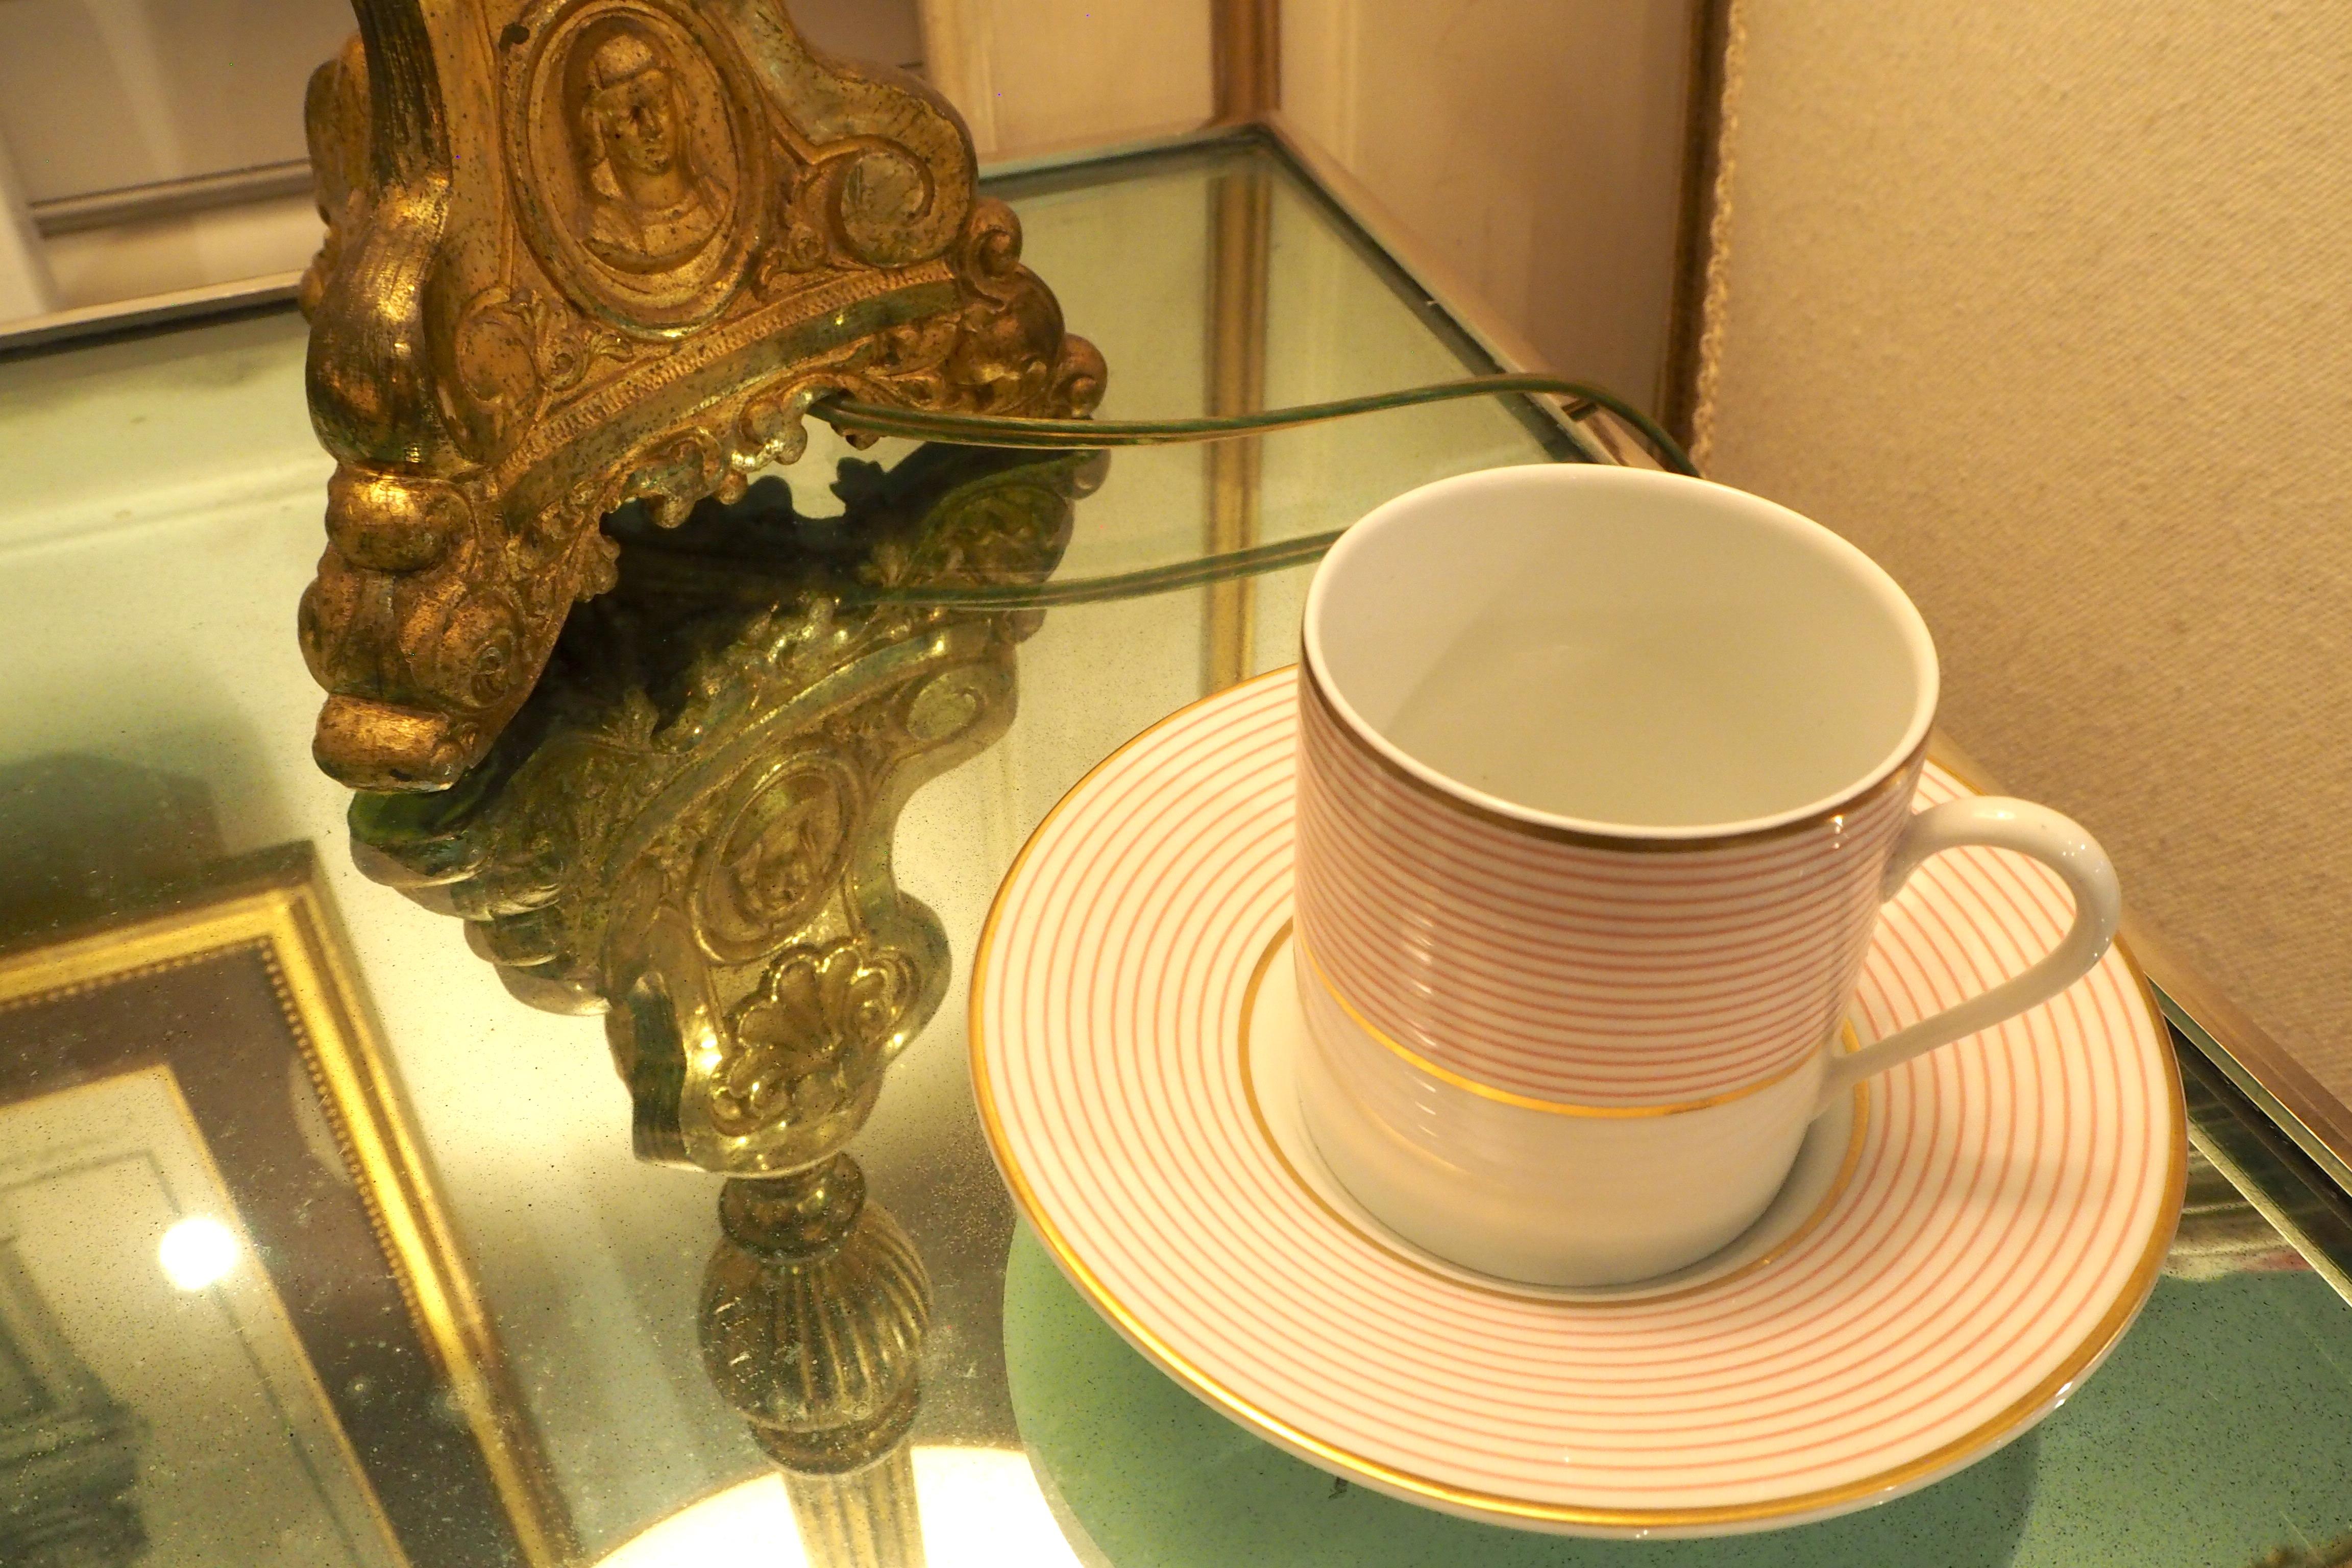 Set of French Coffee Cups and Saucers from La Maison Raynaud, Limoges 1